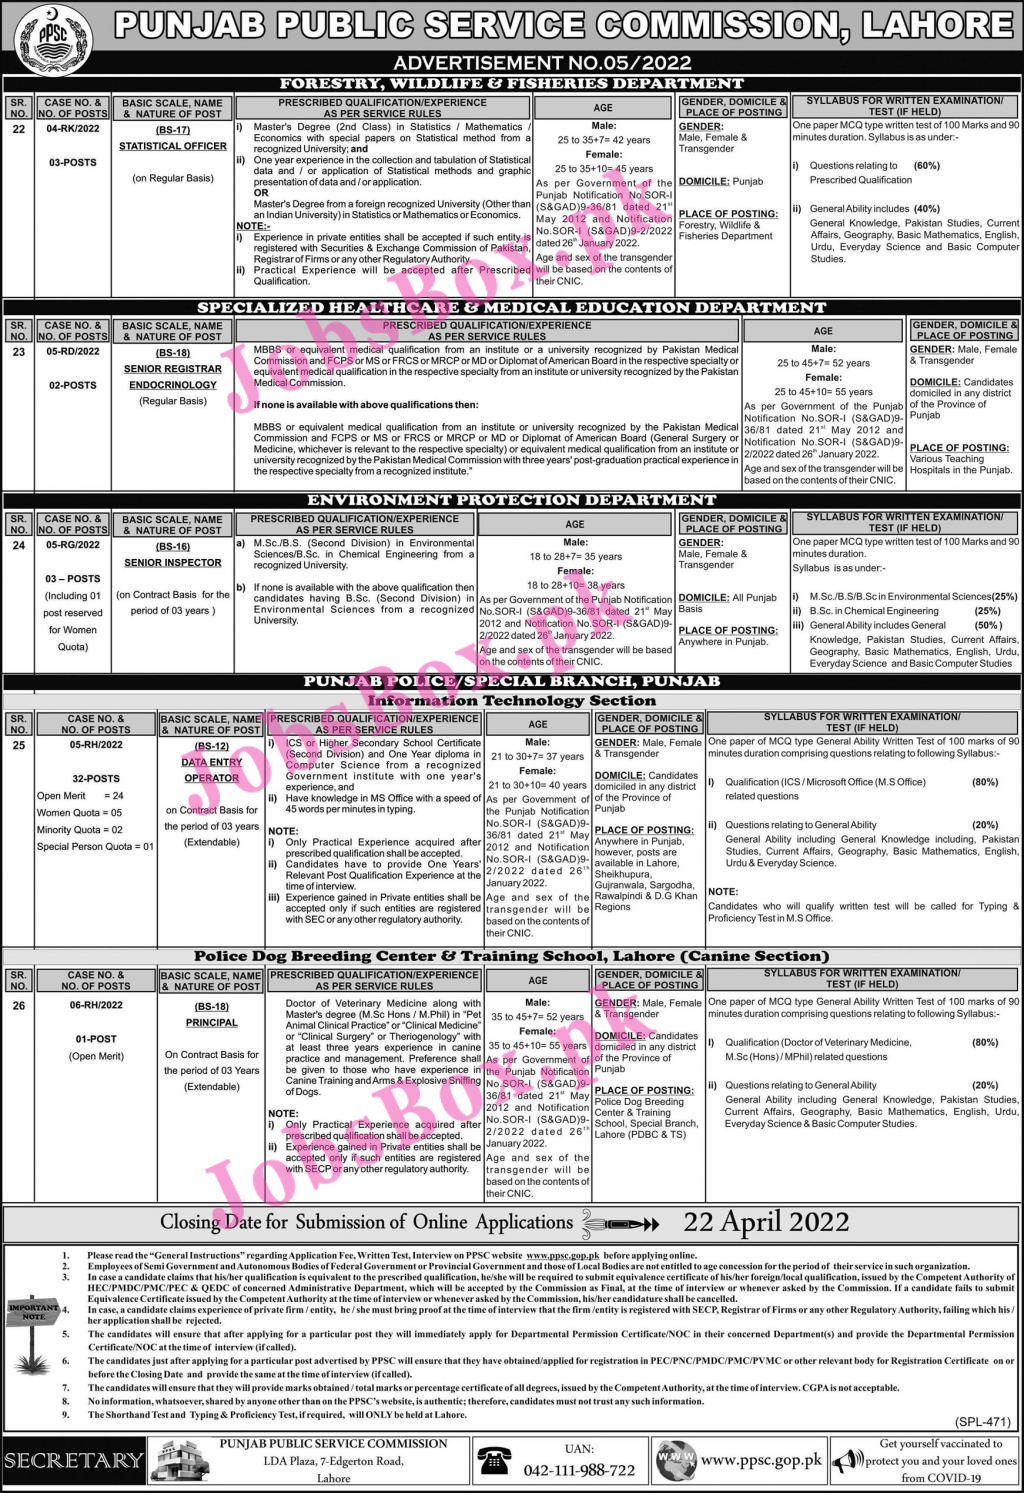 PPSC Jobs 2022 Advertisement No.06 to Ad No.04